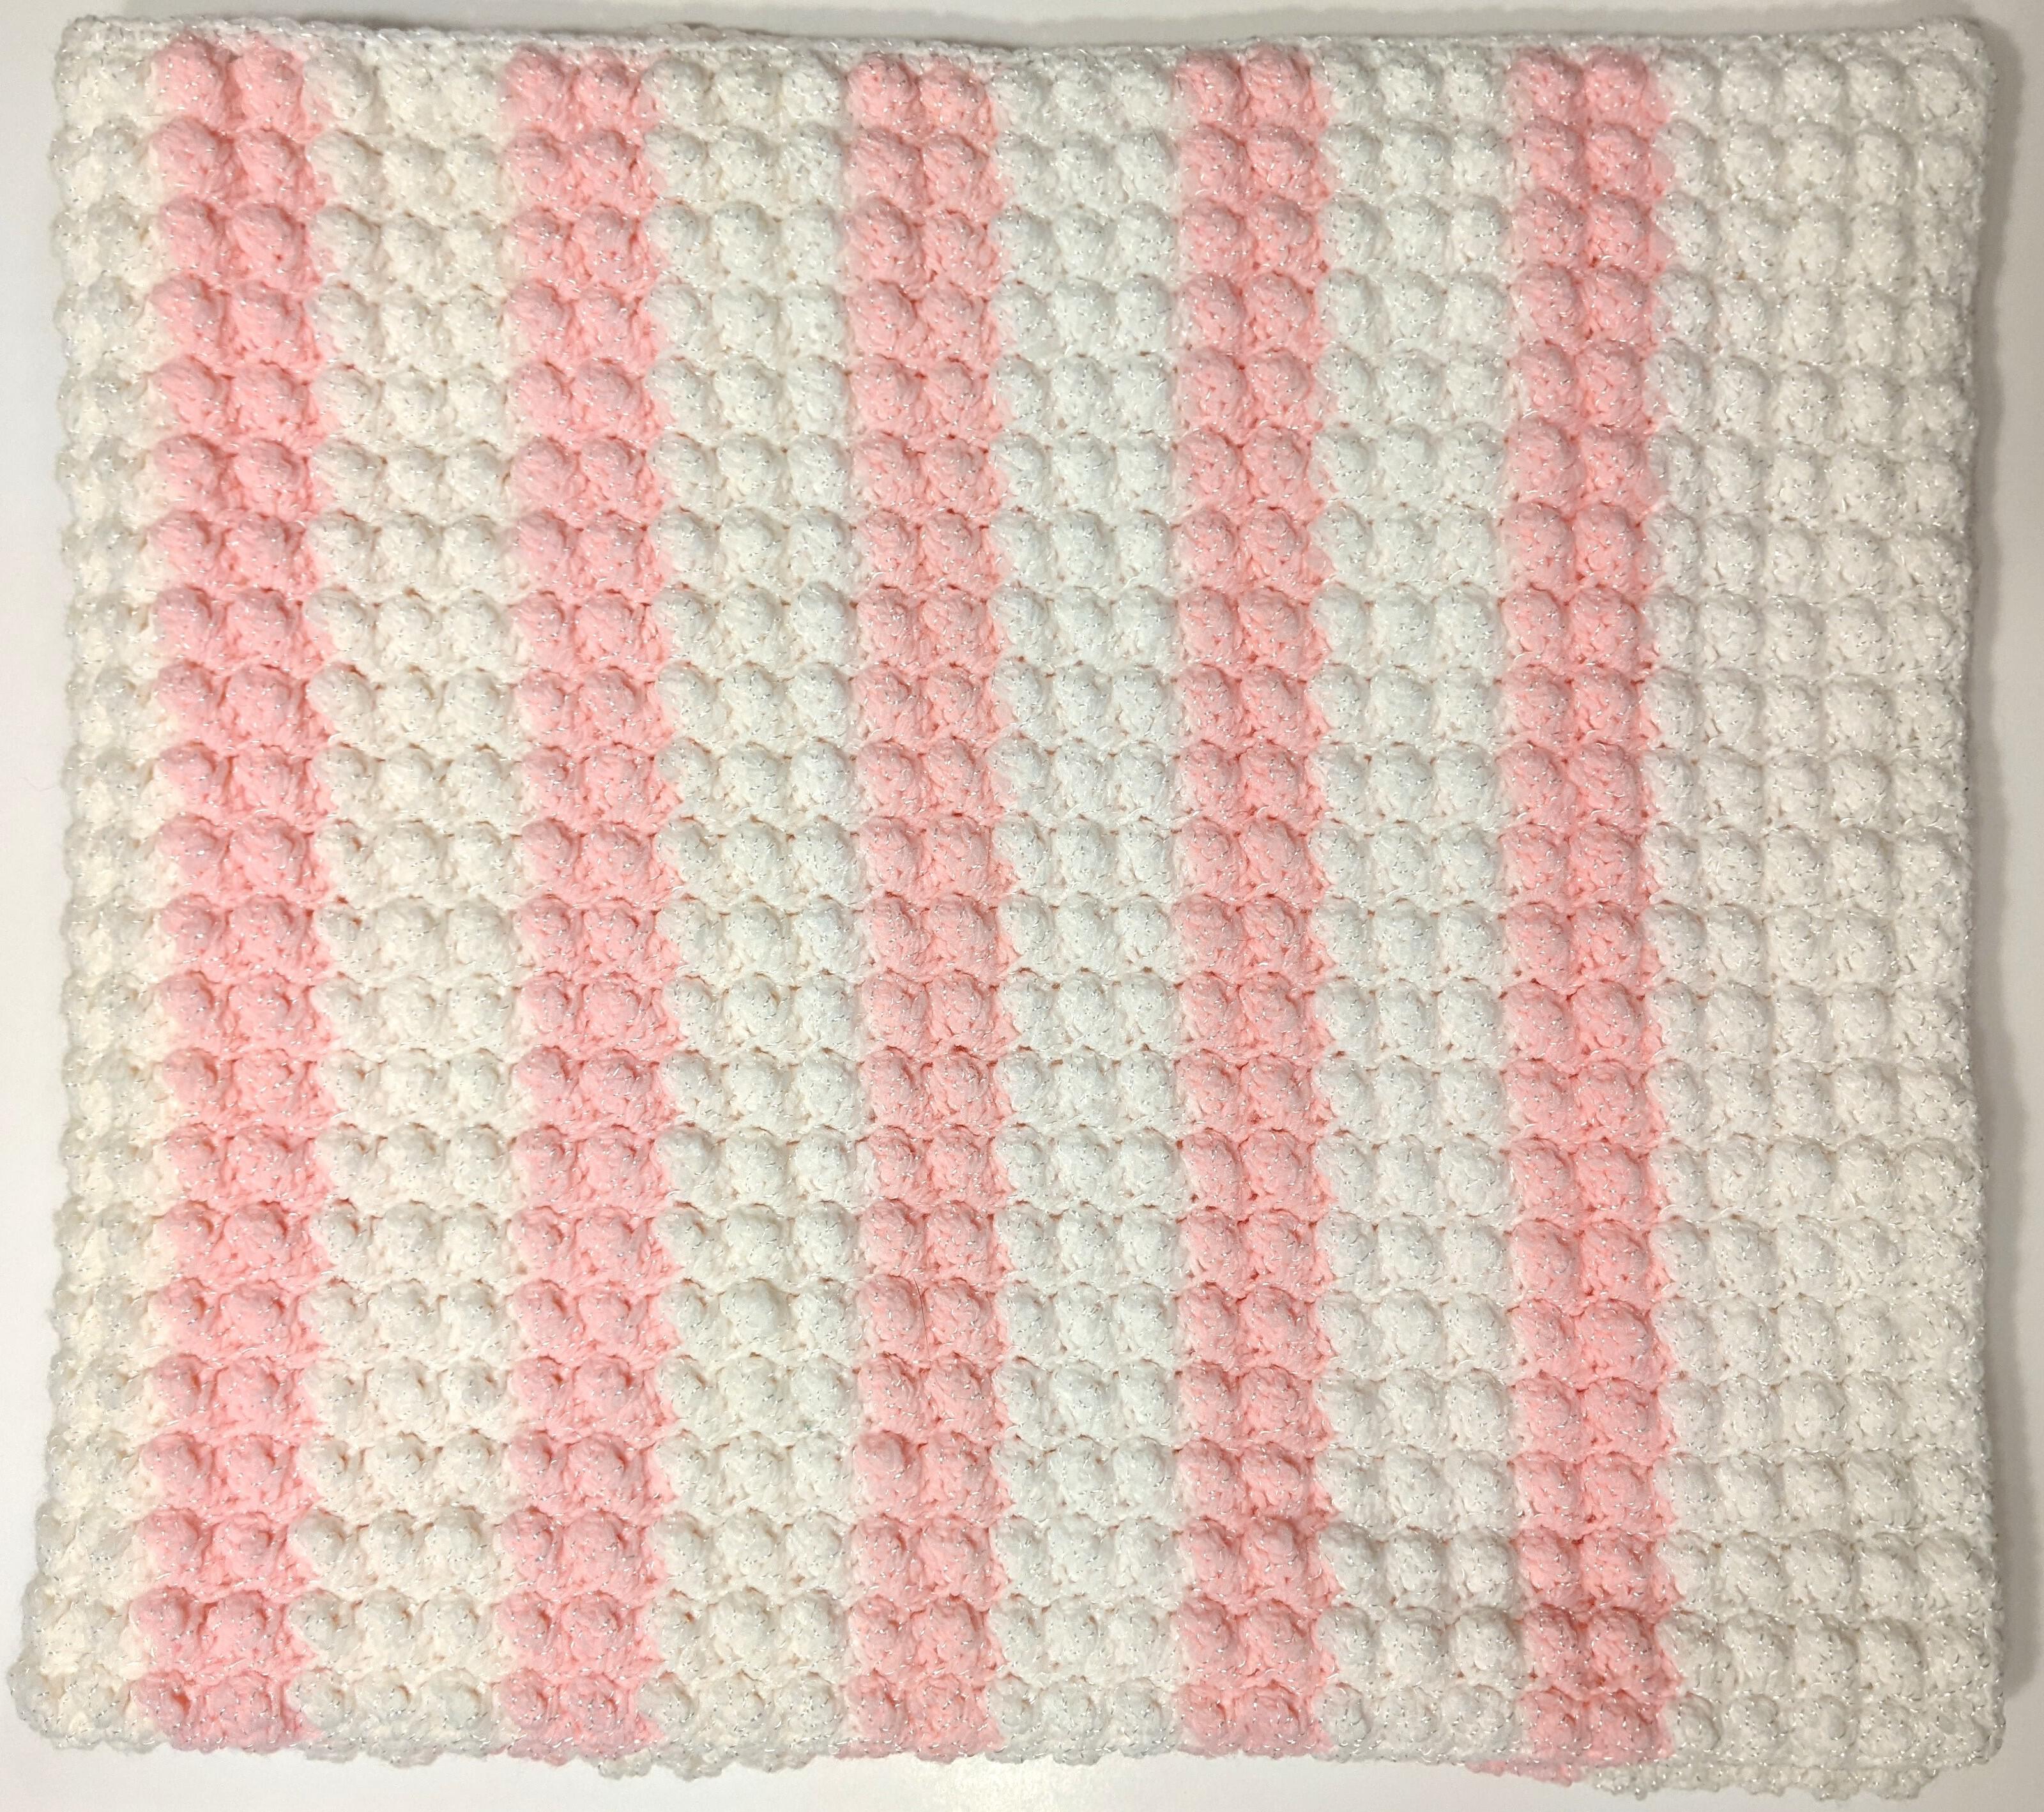 Lucky Charm Crochet Baby Blanket - FREE Digital Pattern, FREE Delivery  Available